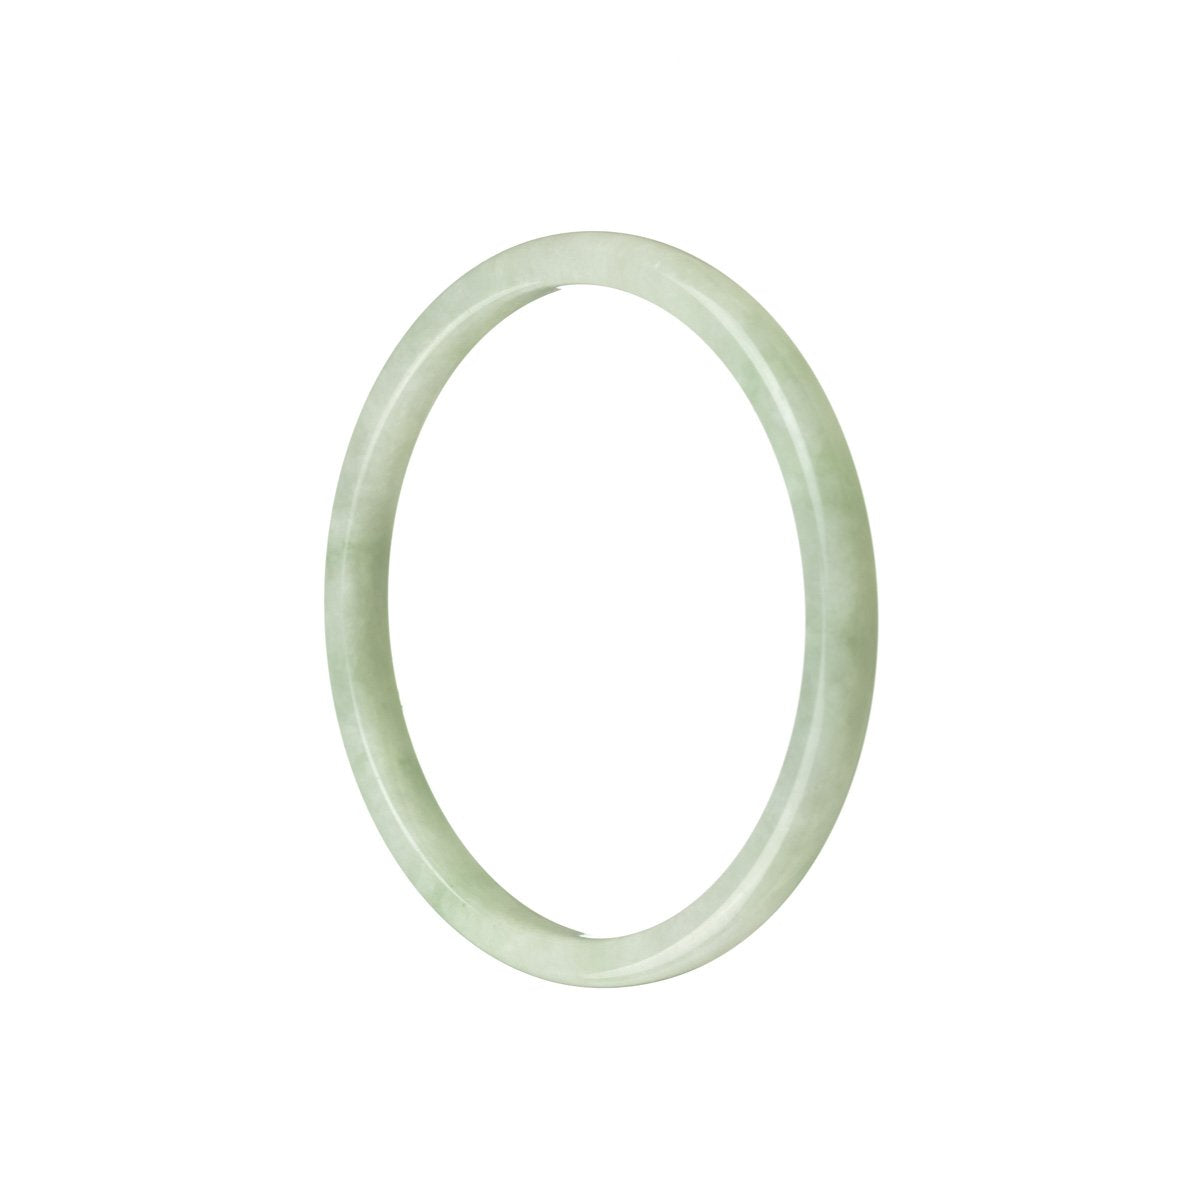 Image of a thin, 52mm certified Grade A Green Burma Jade bracelet with a smooth and polished surface. The bracelet showcases the exquisite beauty and vibrant green color of the jade stones, reflecting a sense of elegance and luxury.